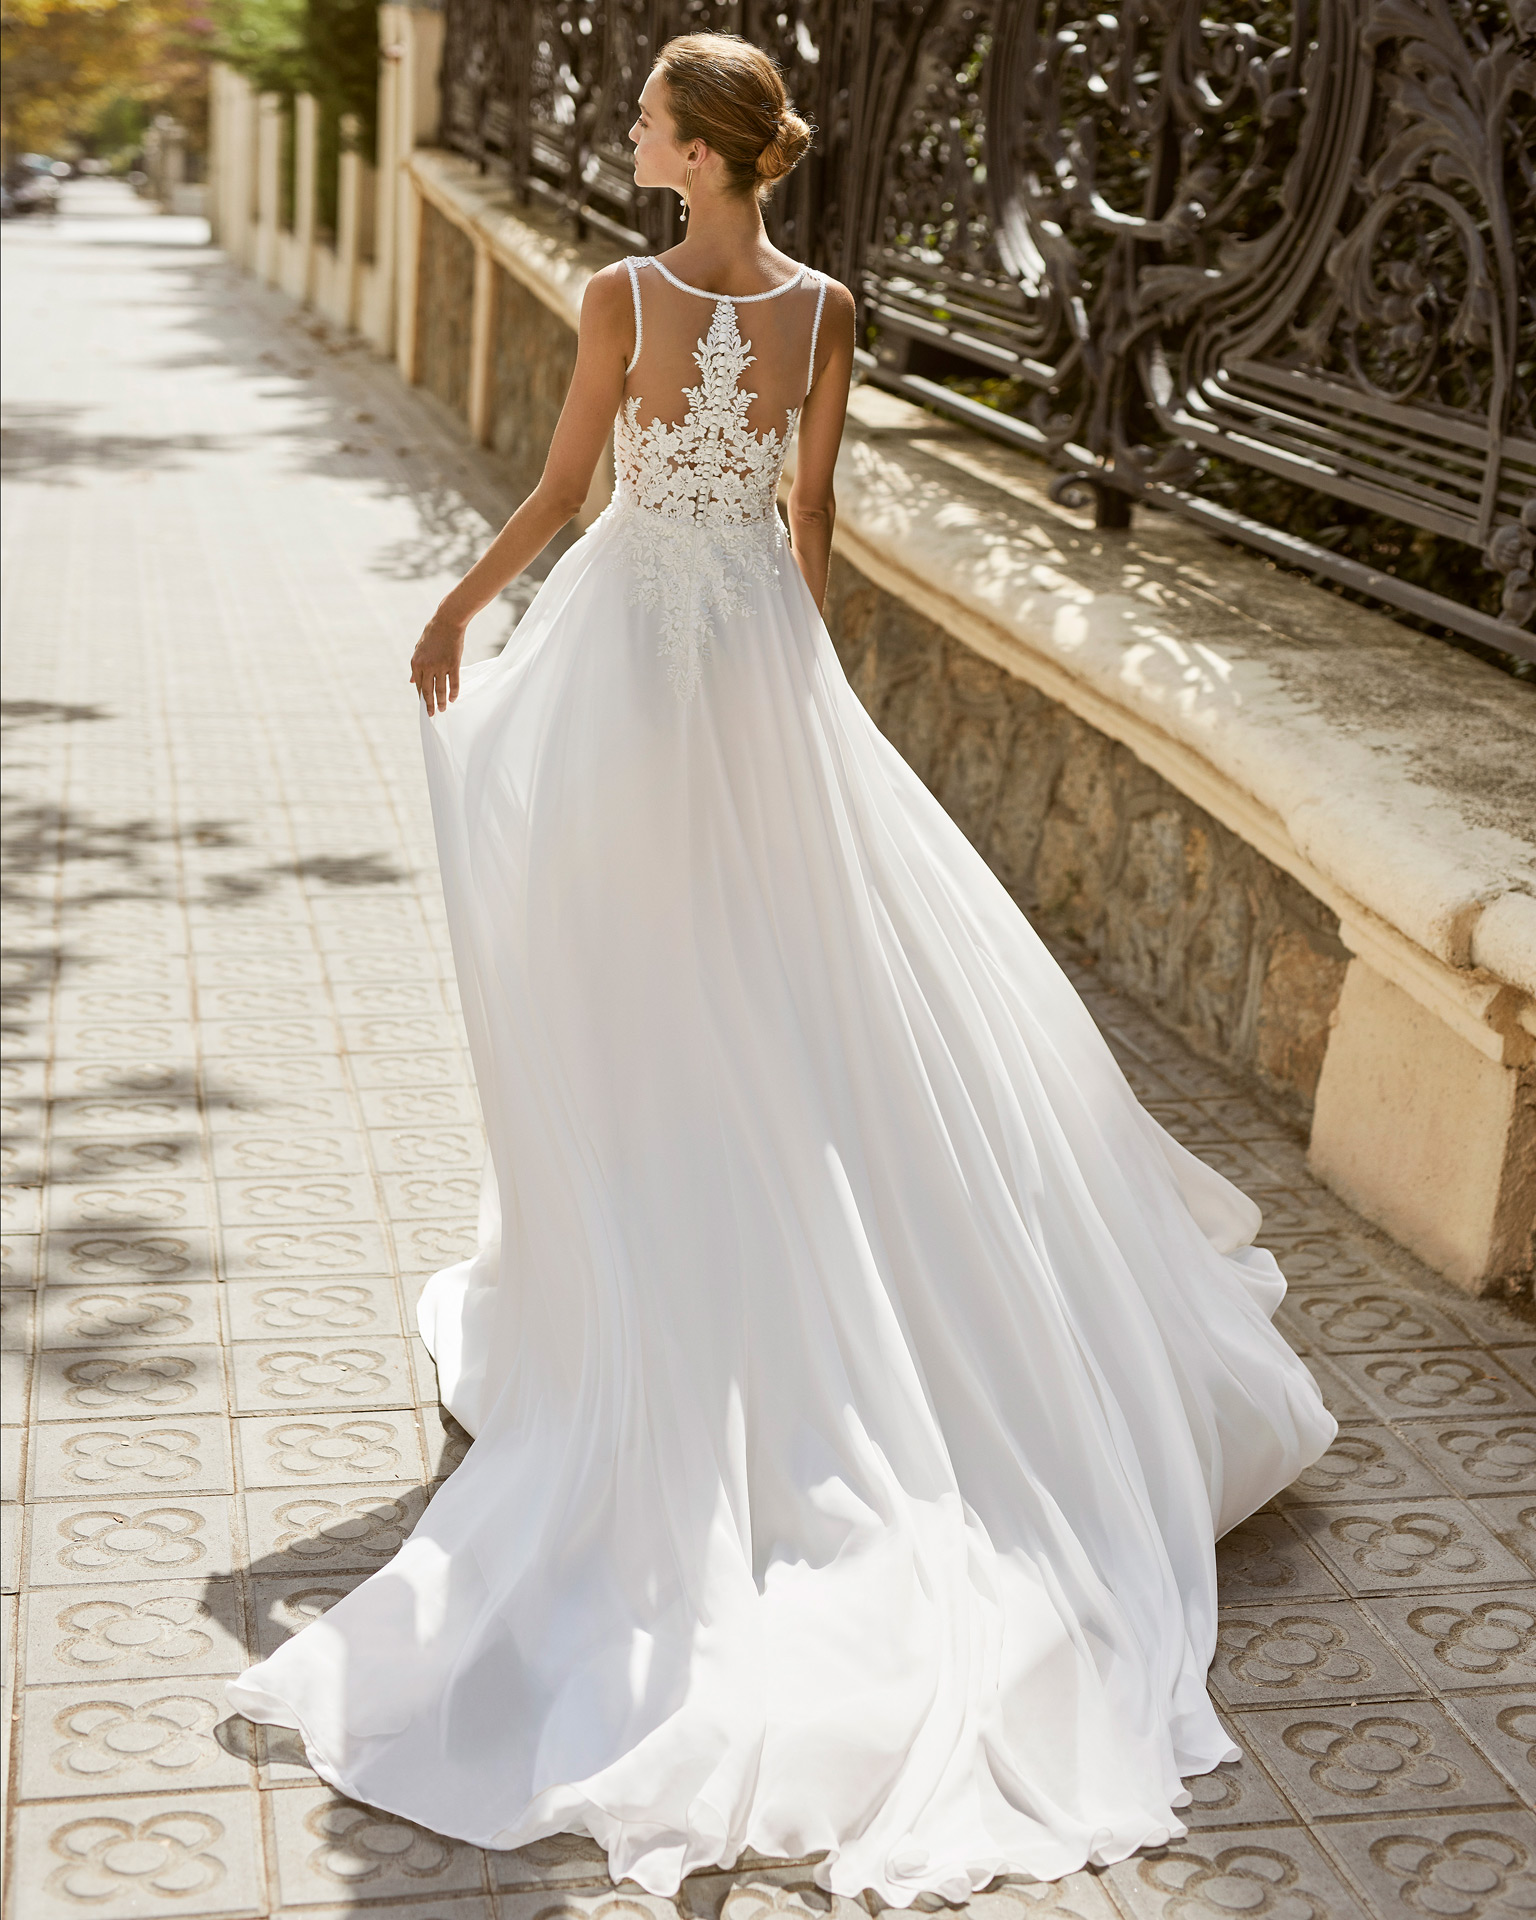 Lightweight wedding dress in voile and beaded lace. V-neck and lace appliqué back. 2022  Collection.